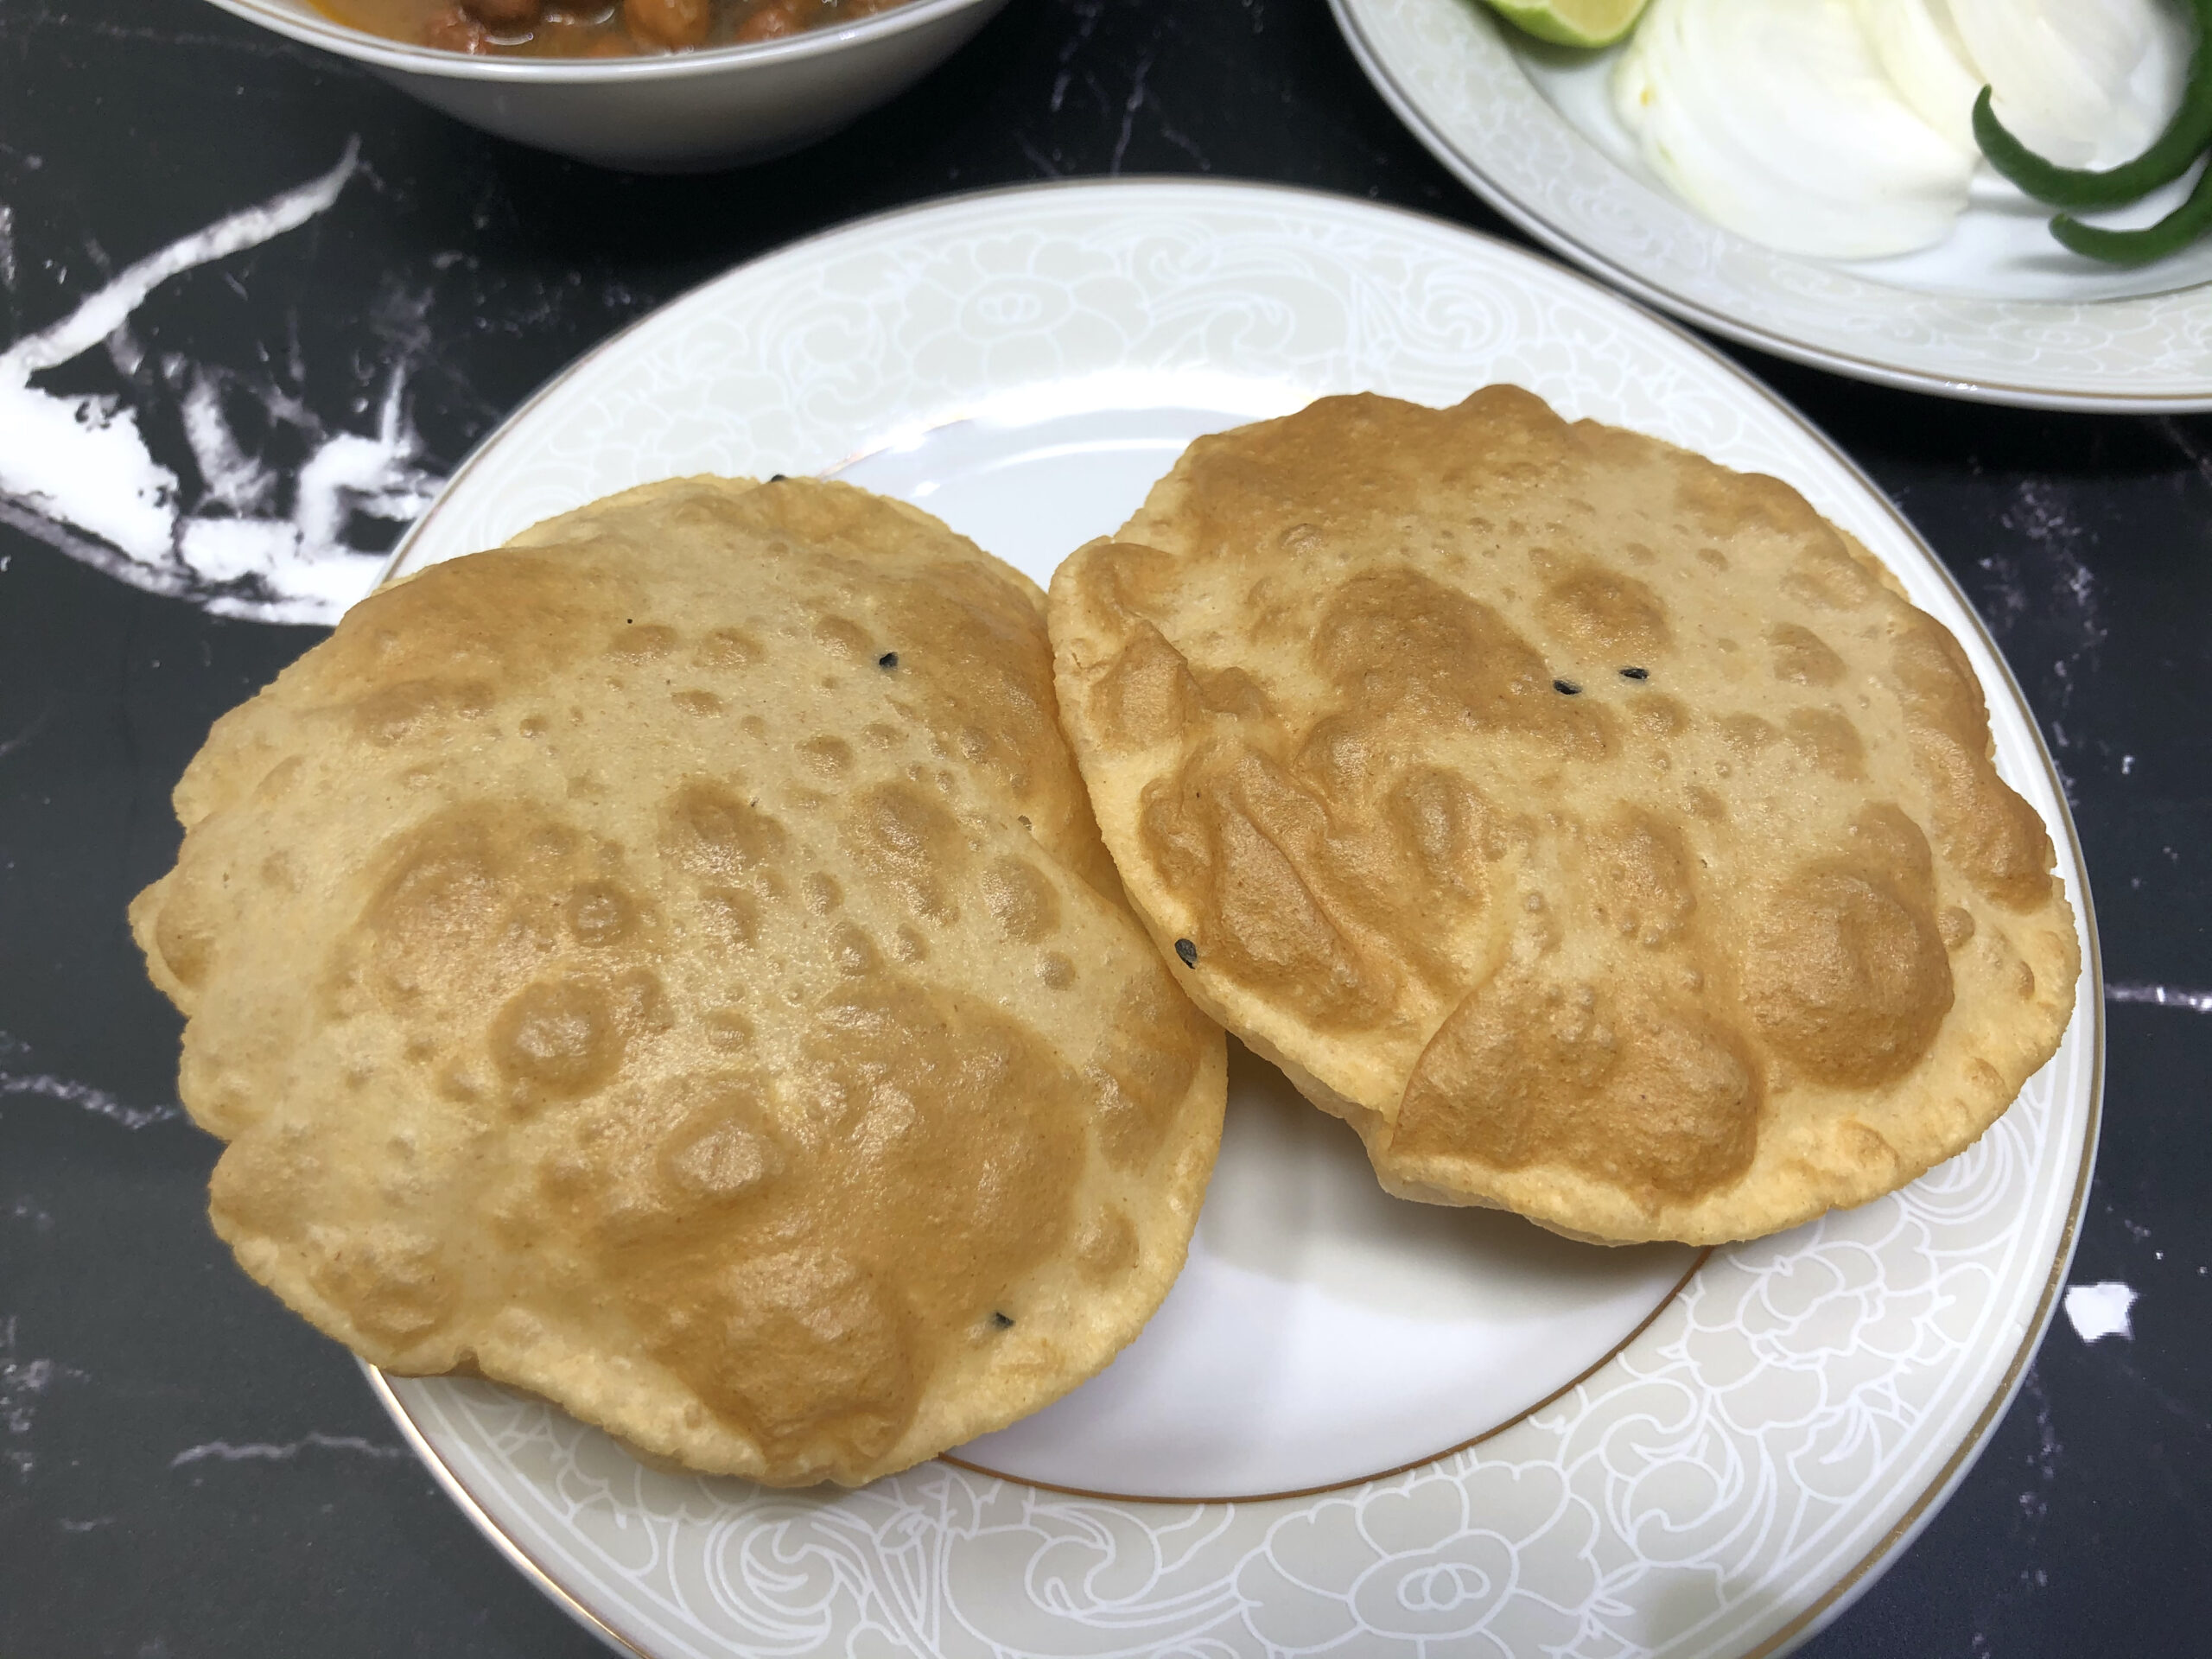 Two Deep fried puri or Indian puffed bread served in a plate.